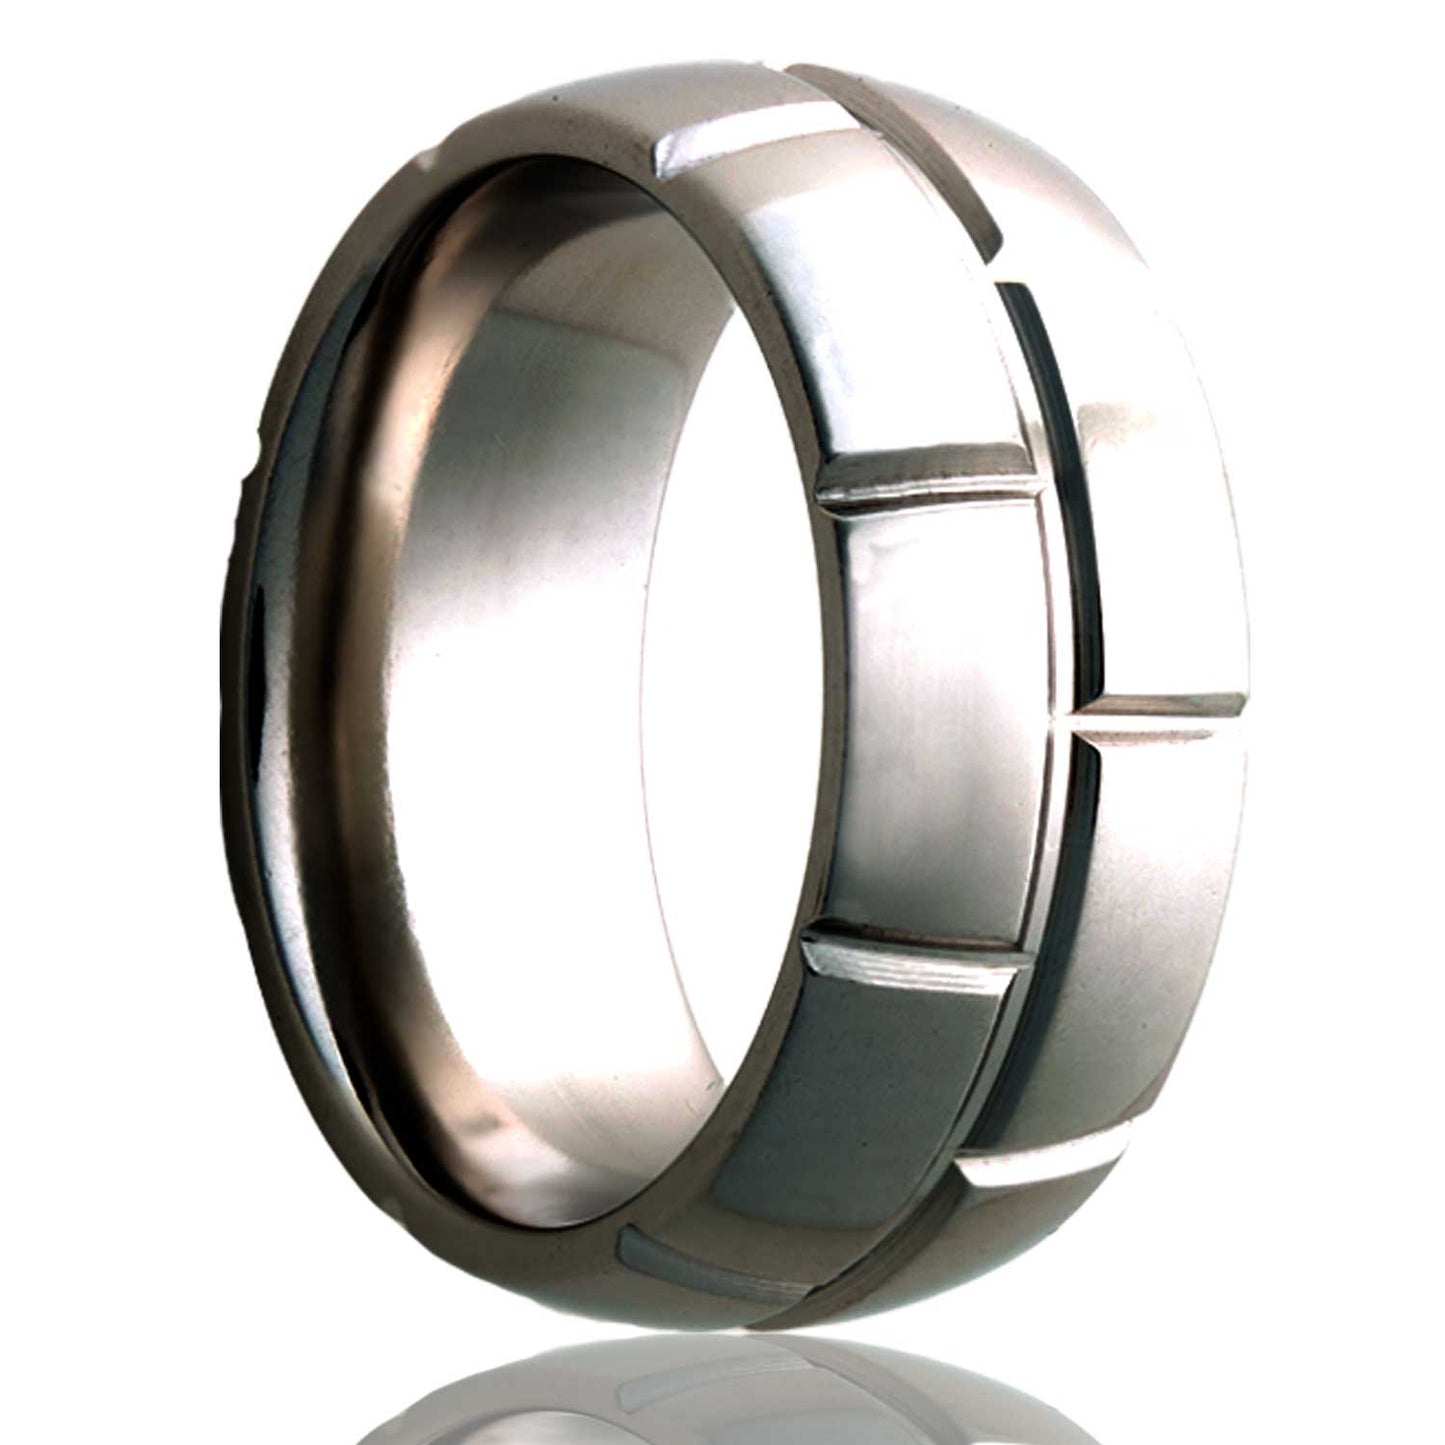 A brick grooved domed titanium wedding band displayed on a neutral white background.